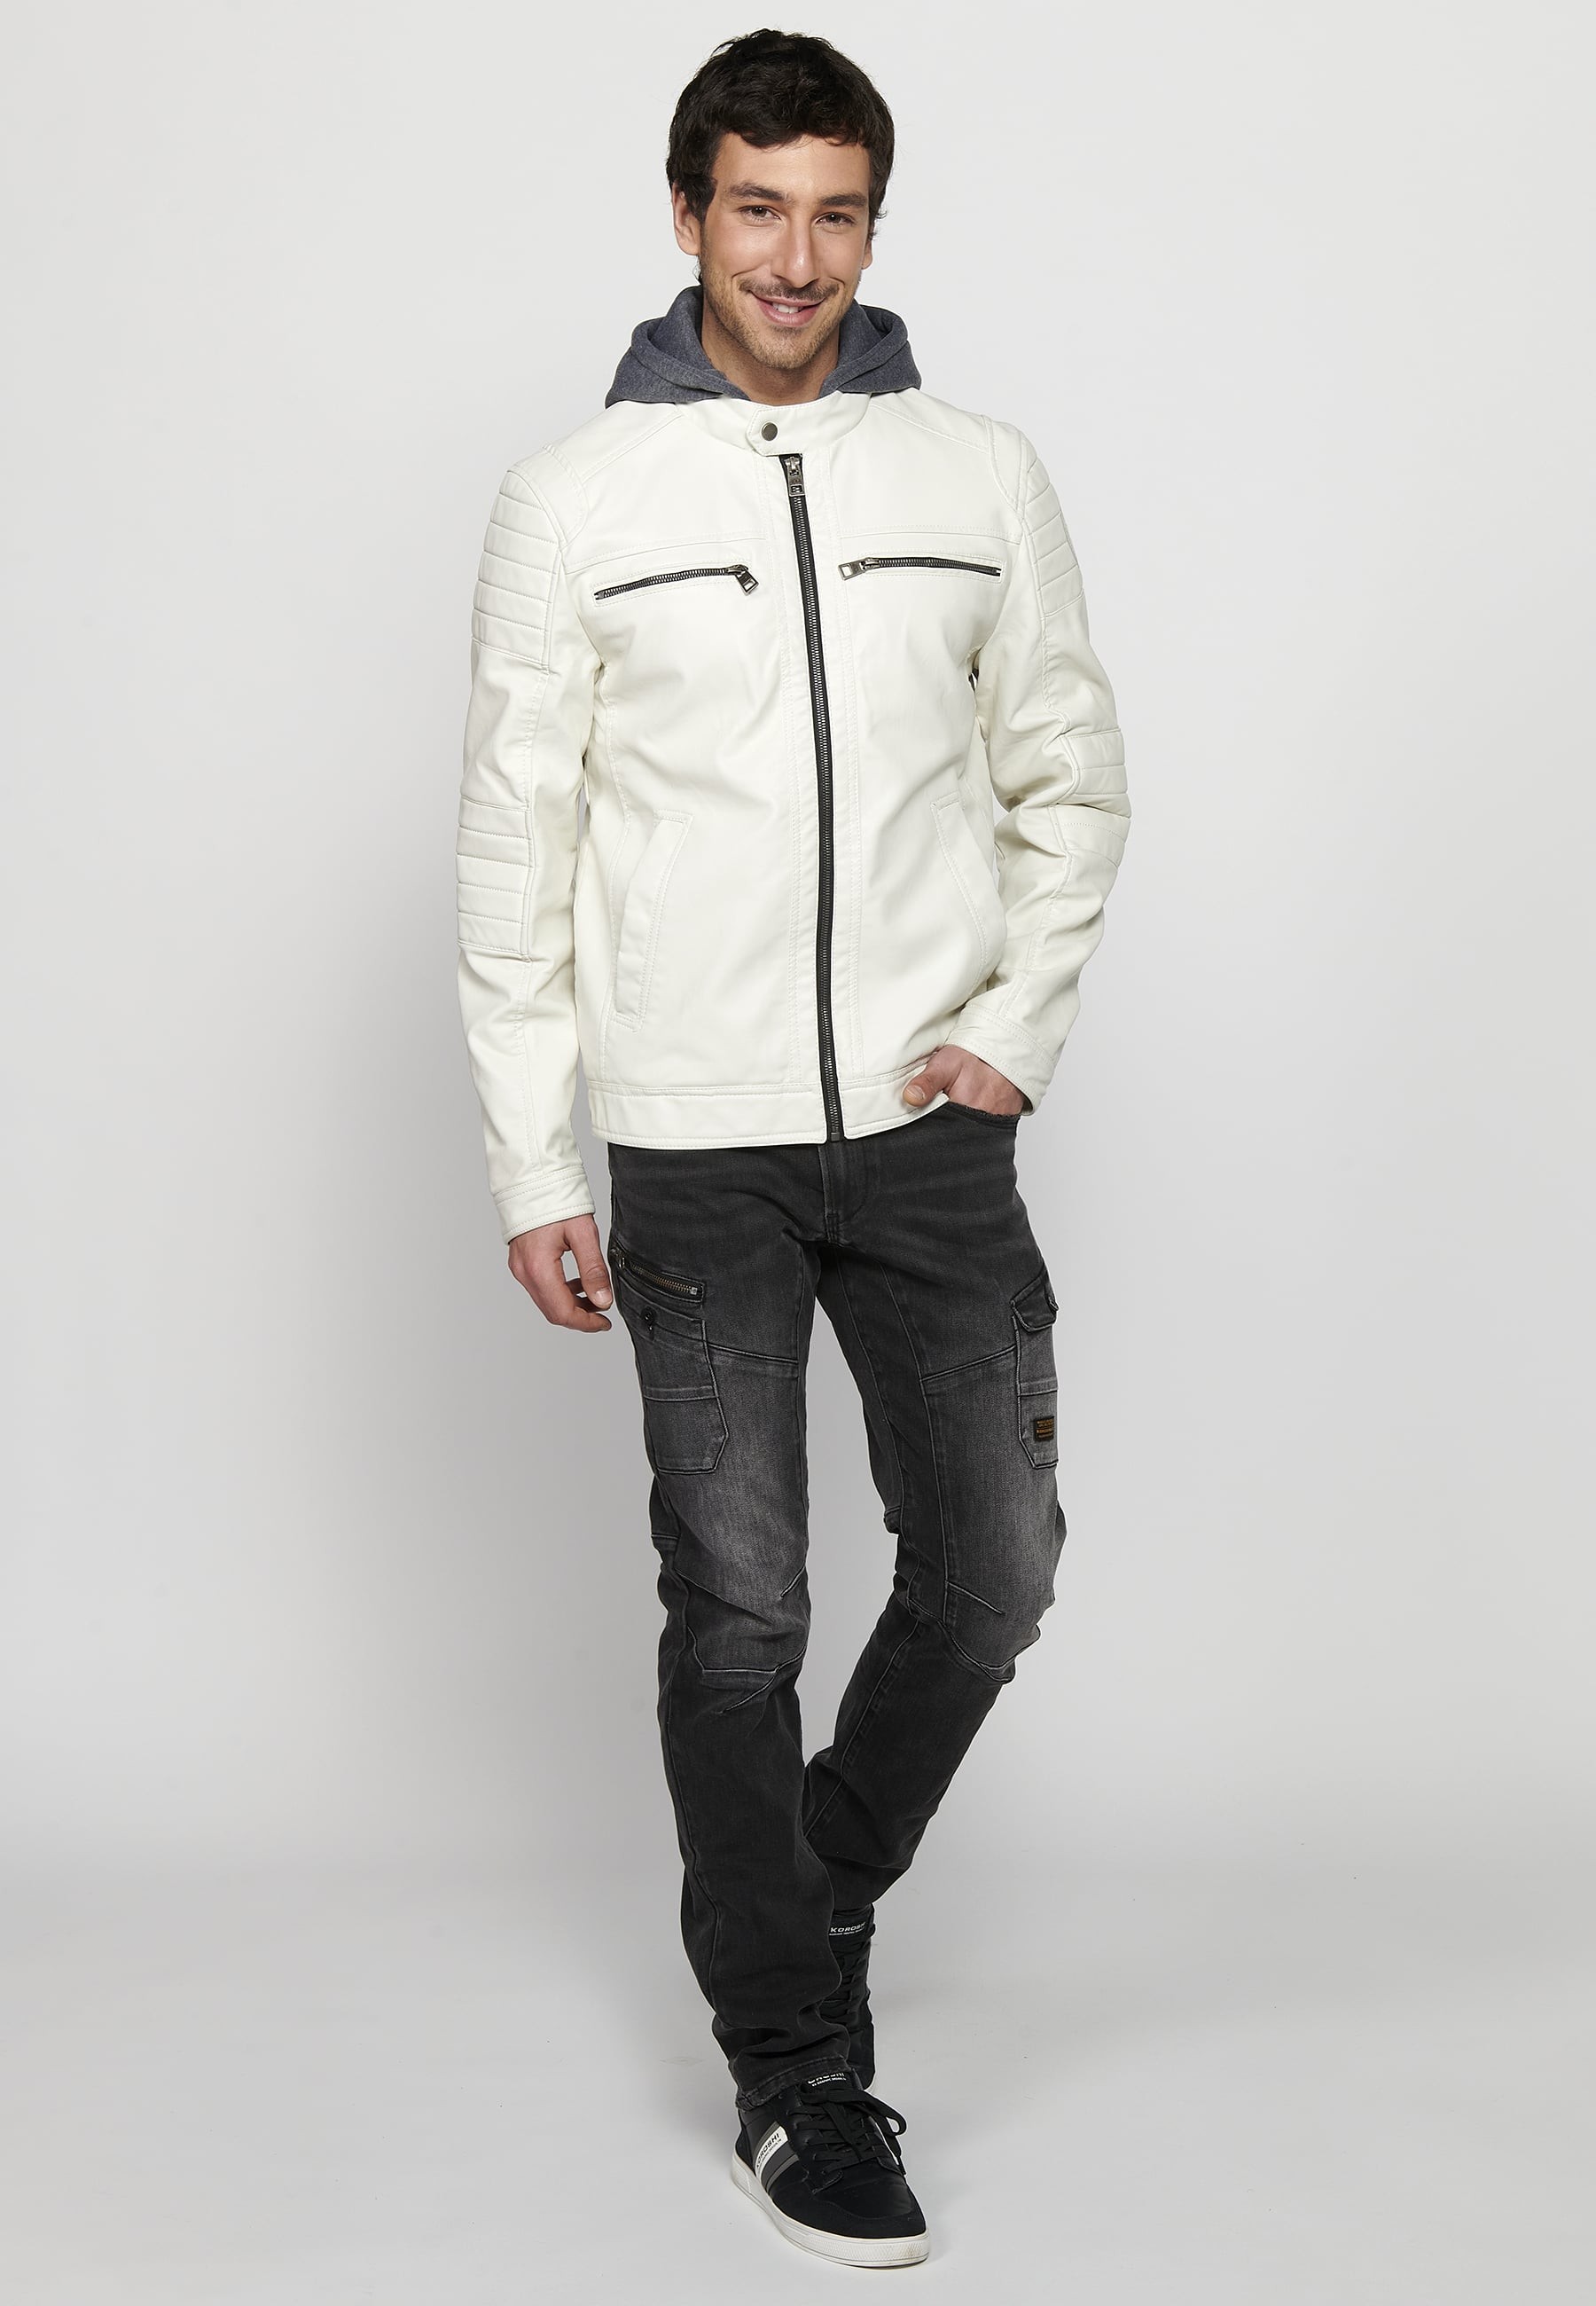 Long-sleeved jacket with zipper front closure and adjustable detachable hooded collar with drawstring in Ecru for Men 3